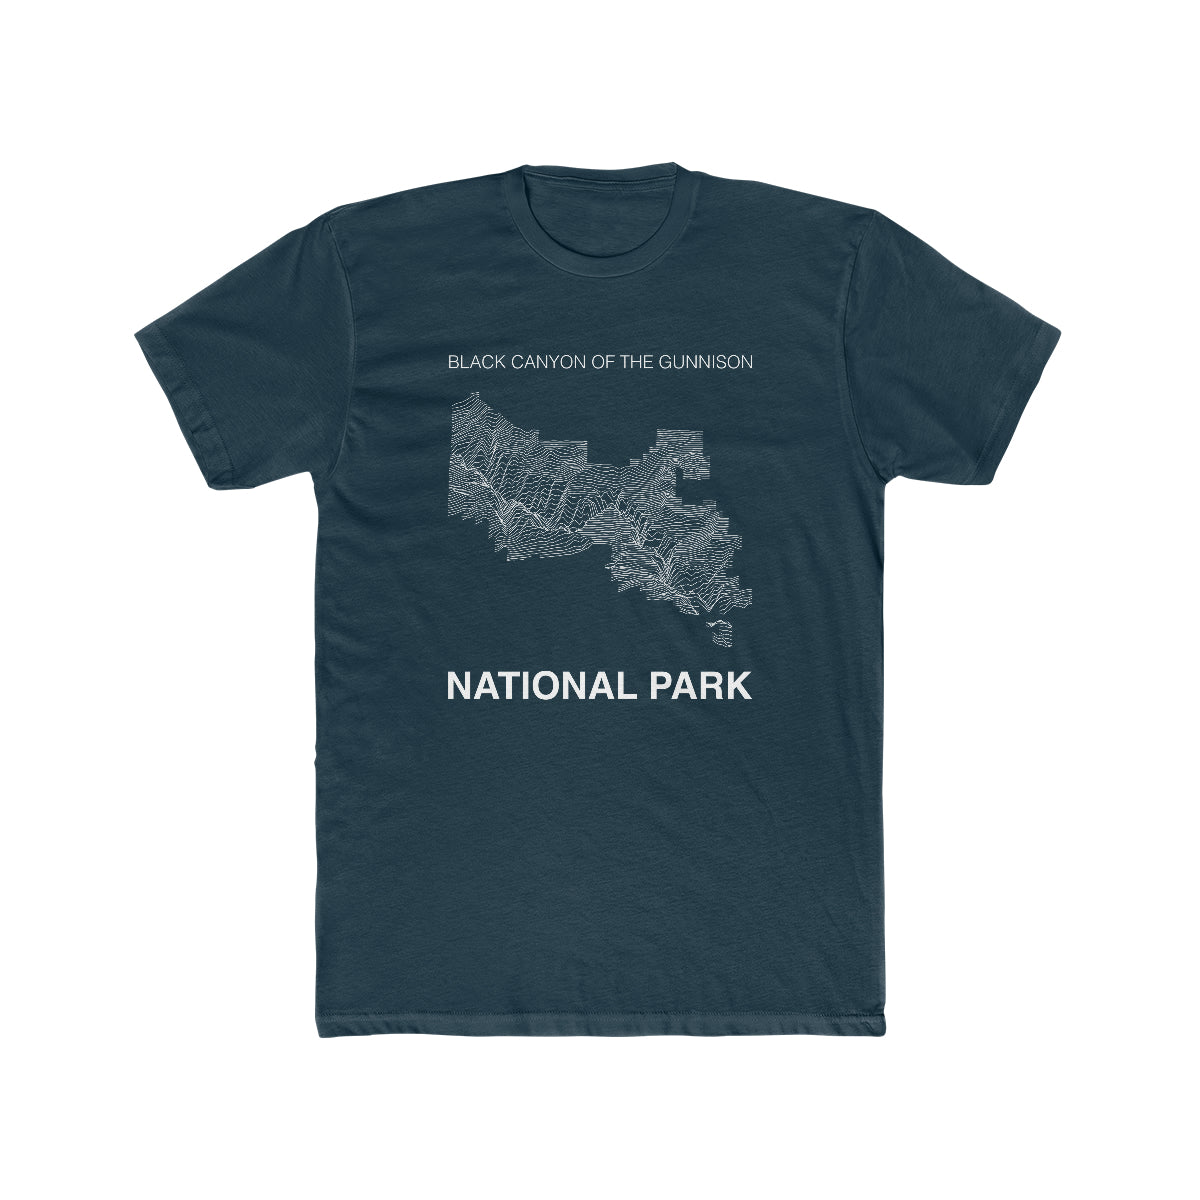 Black Canyon of the Gunnison National Park T-Shirt Lines